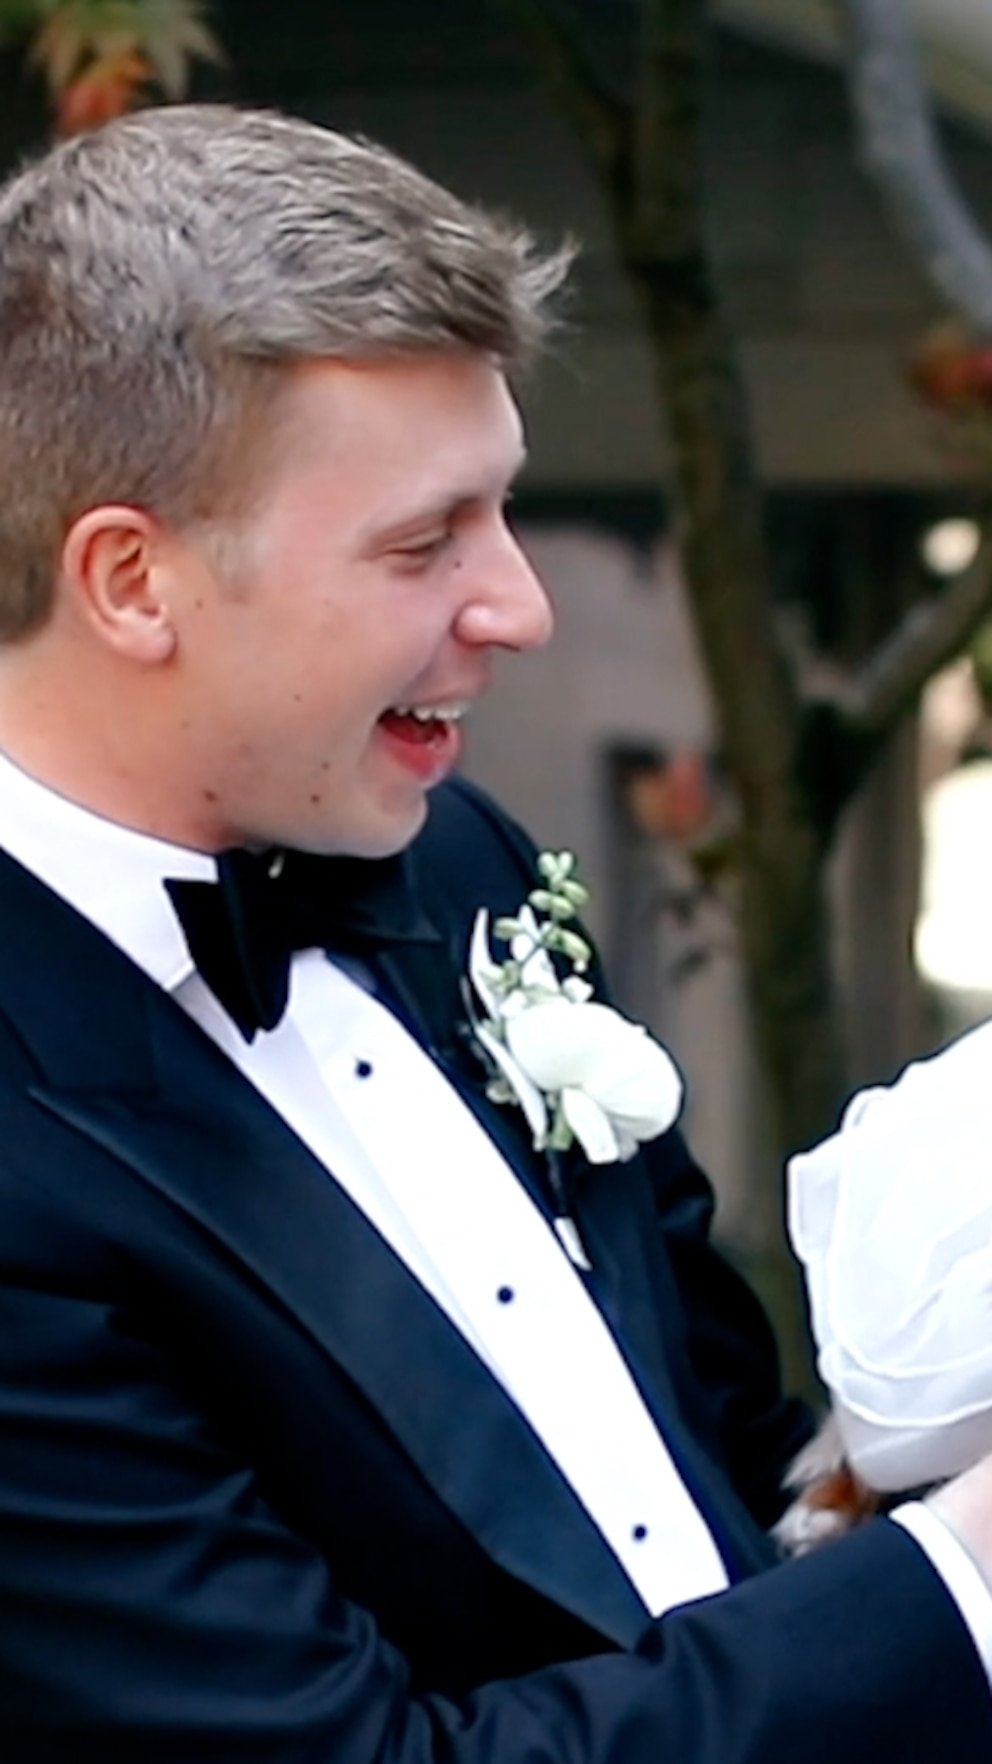 WATCH: Groom and his Dachshund go viral for adorable 1st look surprise at wedding